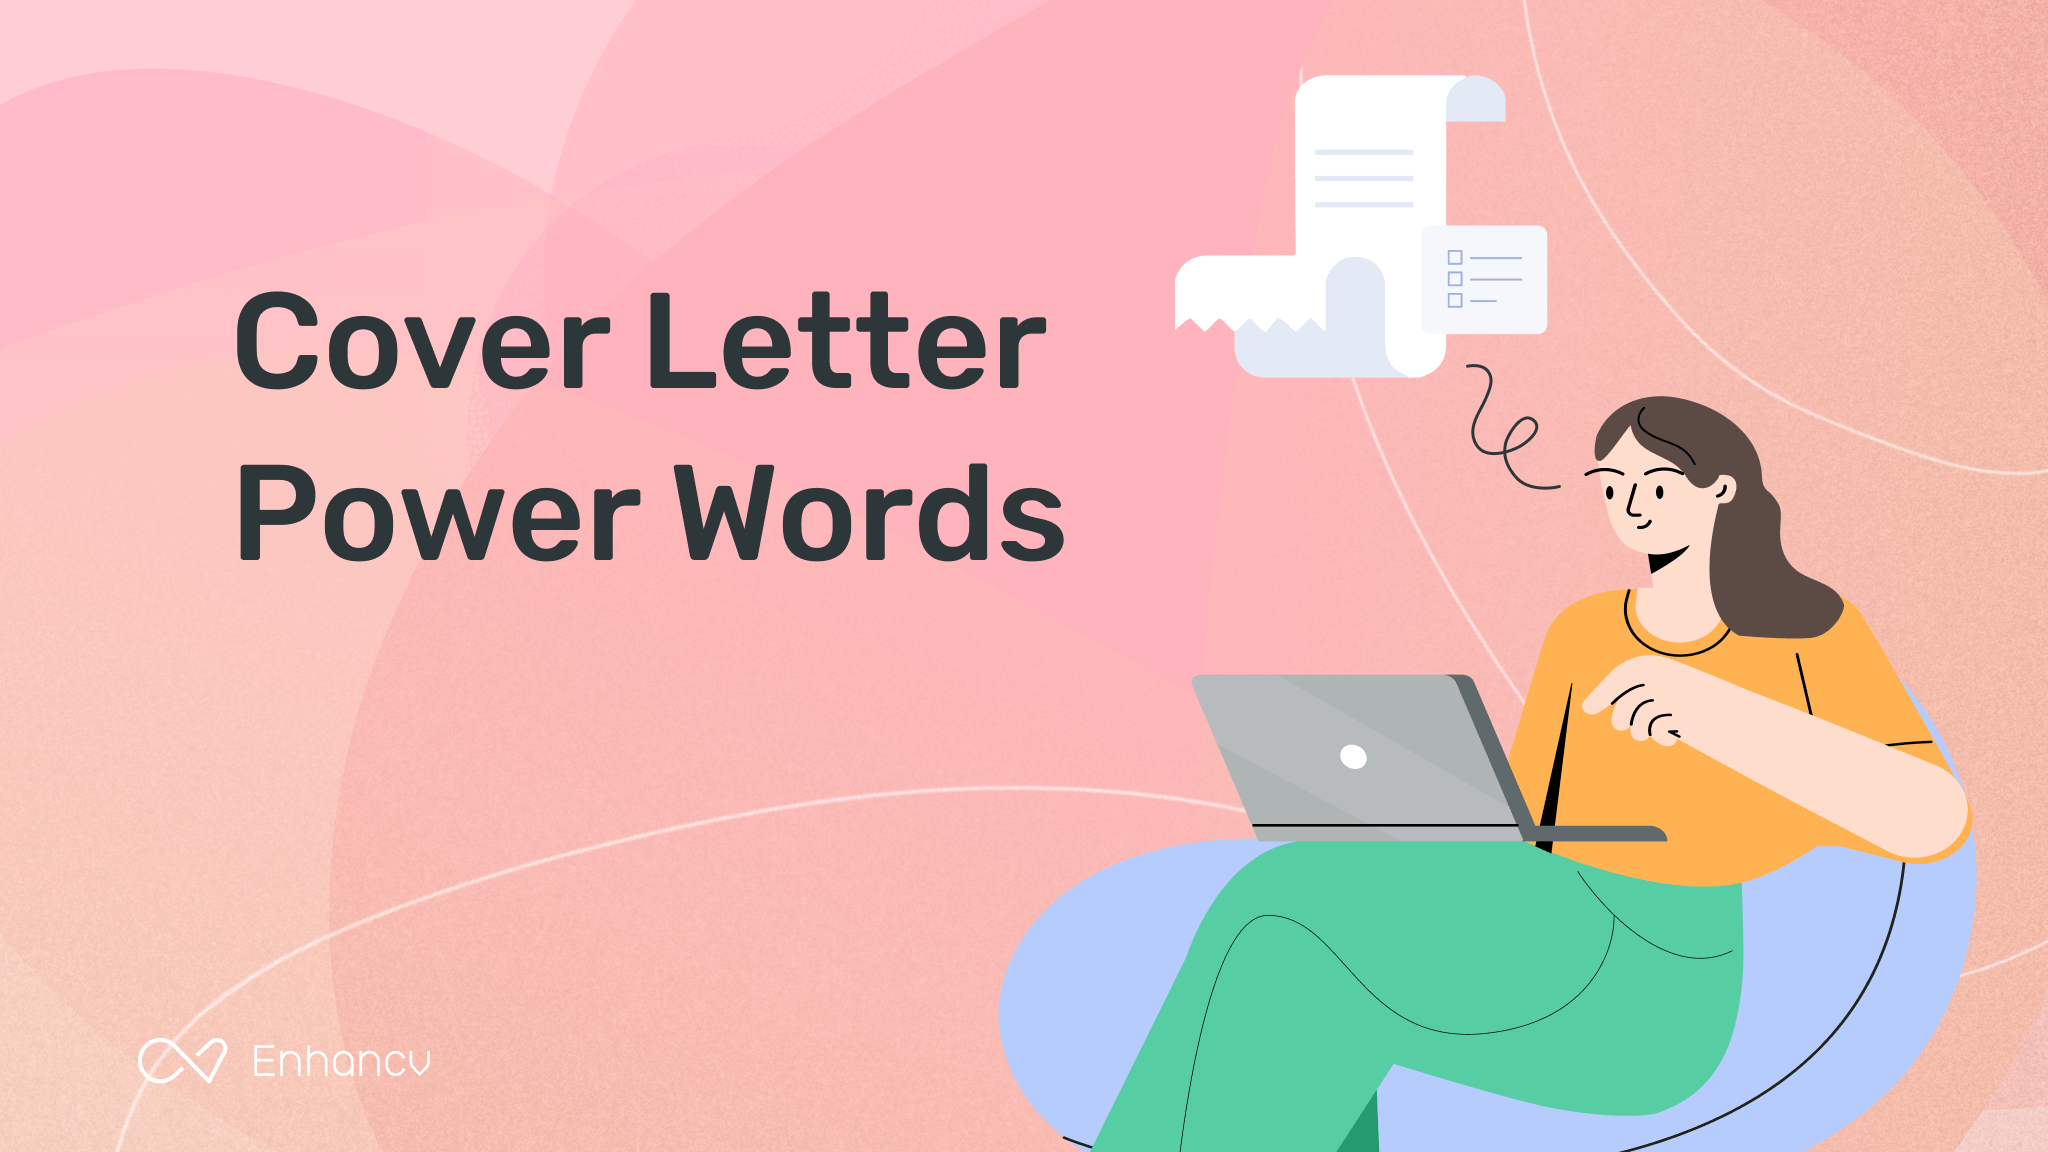 power words in cover letter